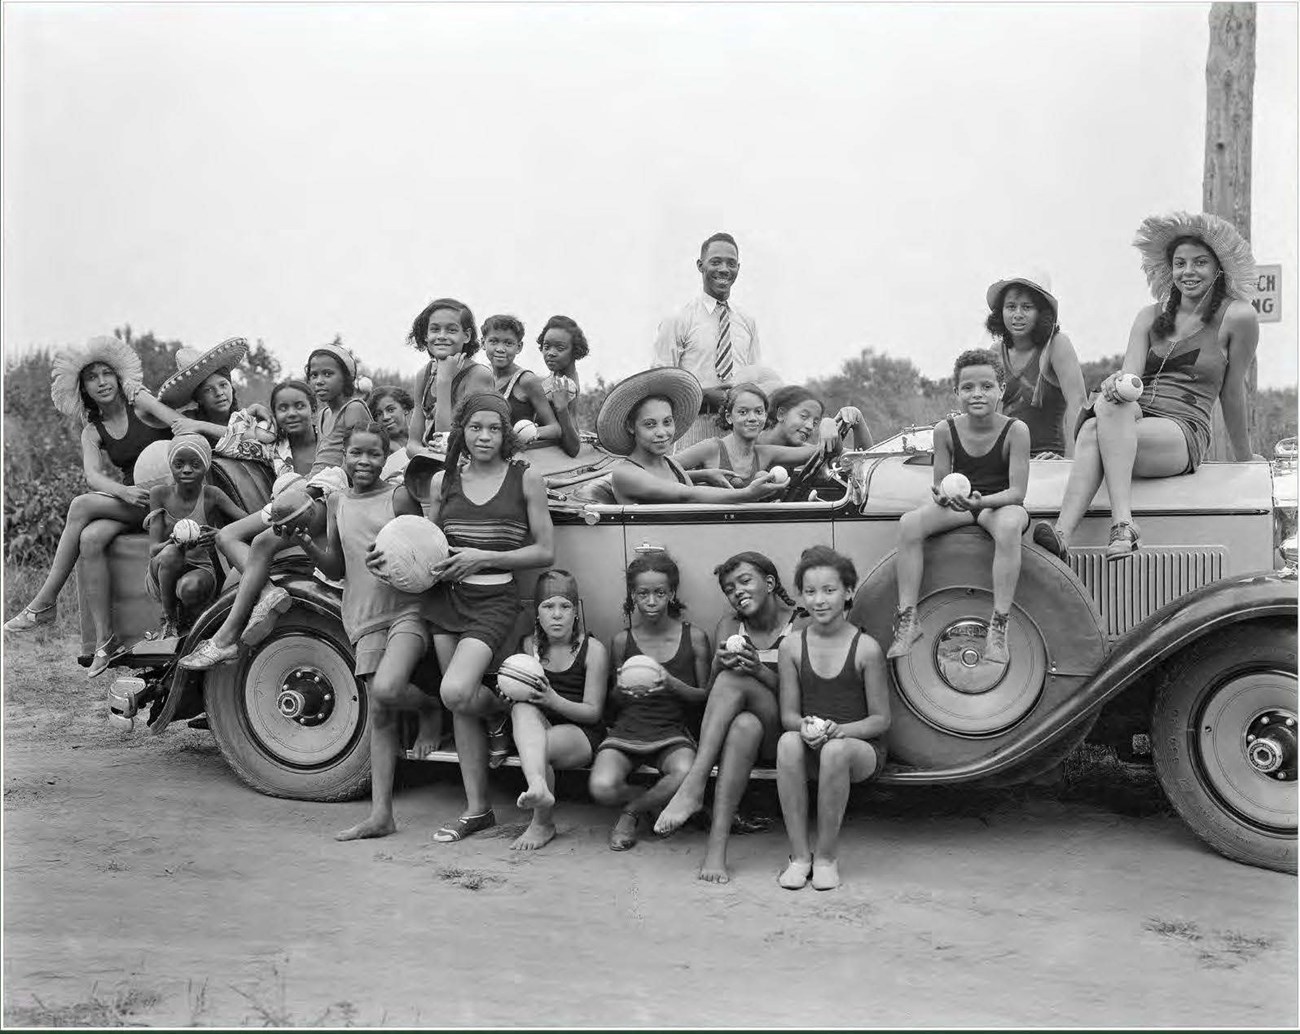 A group largely composed of young women playing ball at the beach pose by a vintage automobile.